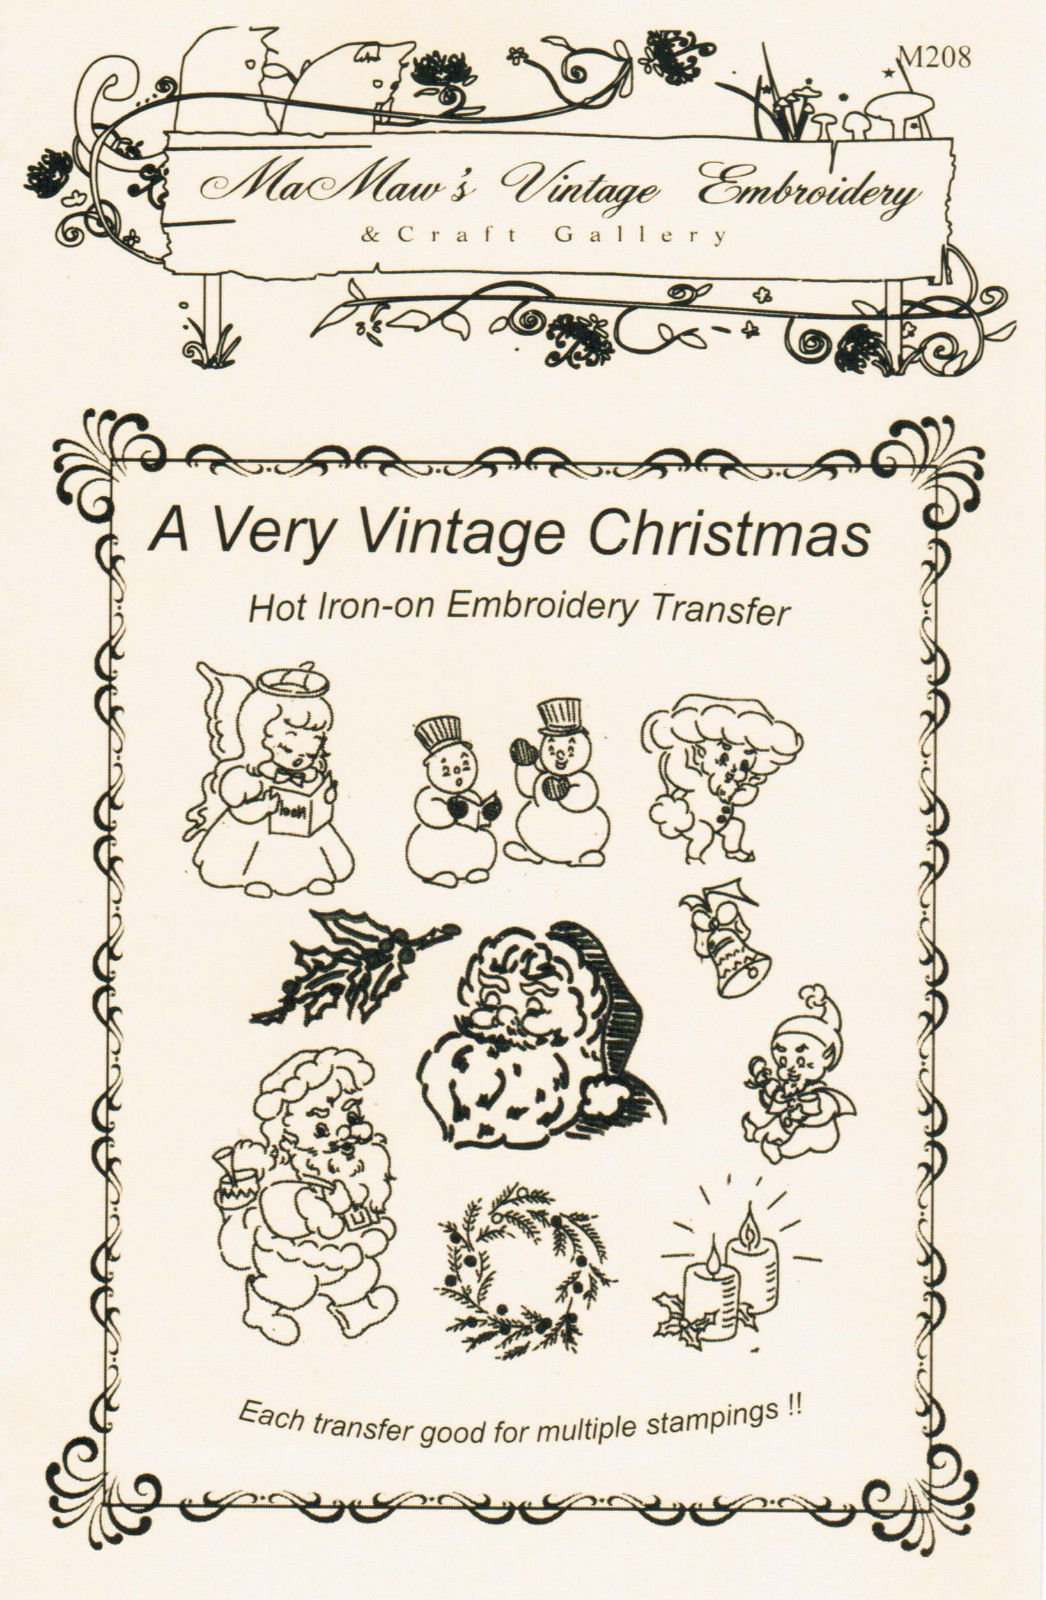 A Very Vintage Christmas Hot Iron Embroidery Transfers by MaMaw's Vintage  Embroidery